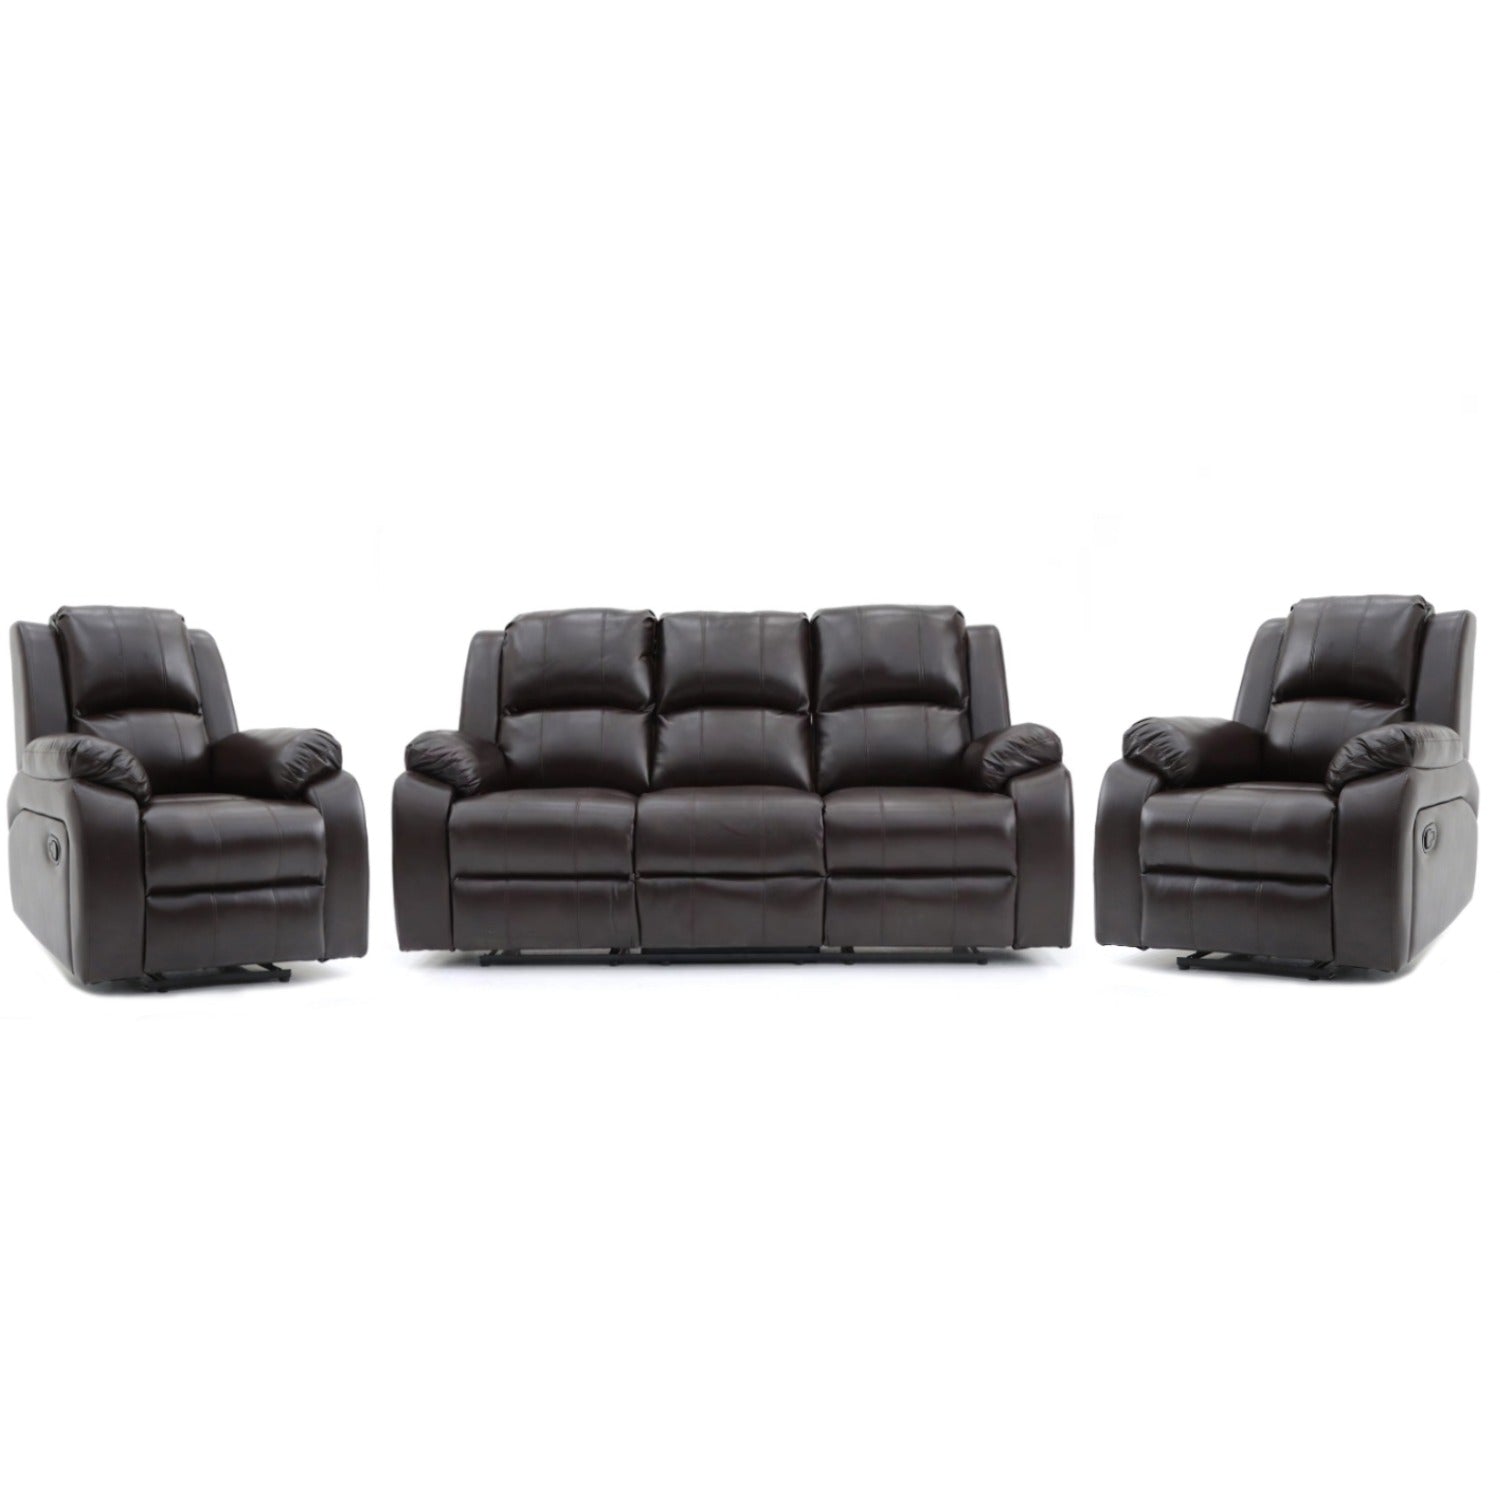 Darwin 3 Seater and 2 Chairs Manual Recliner Brown Leather